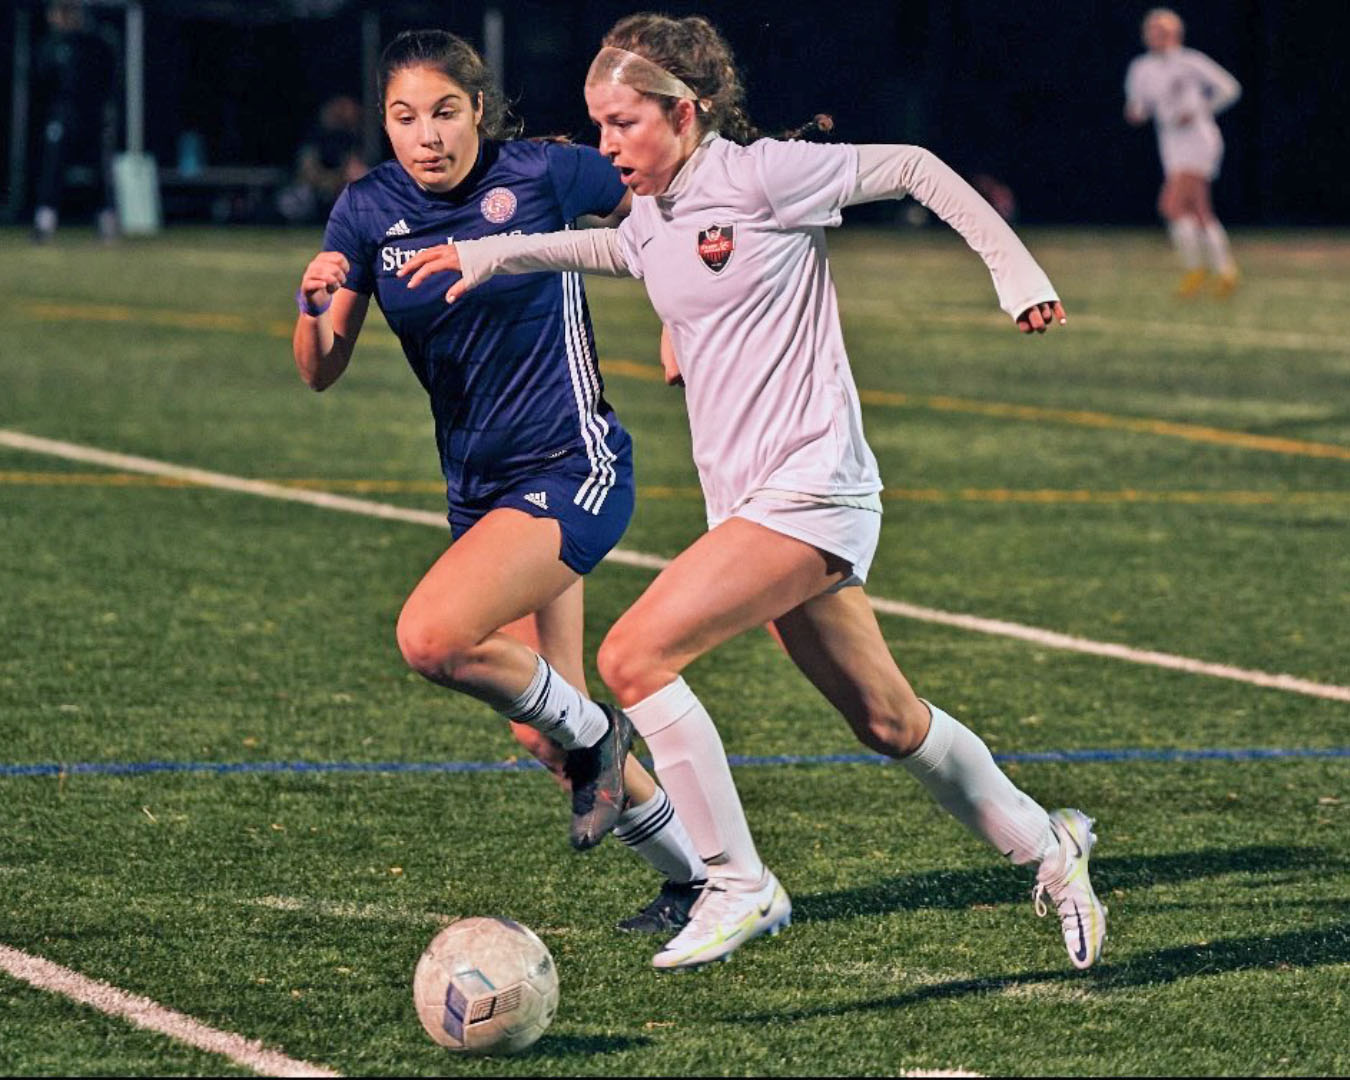 kara slavin fights off a defender while protecting the ball